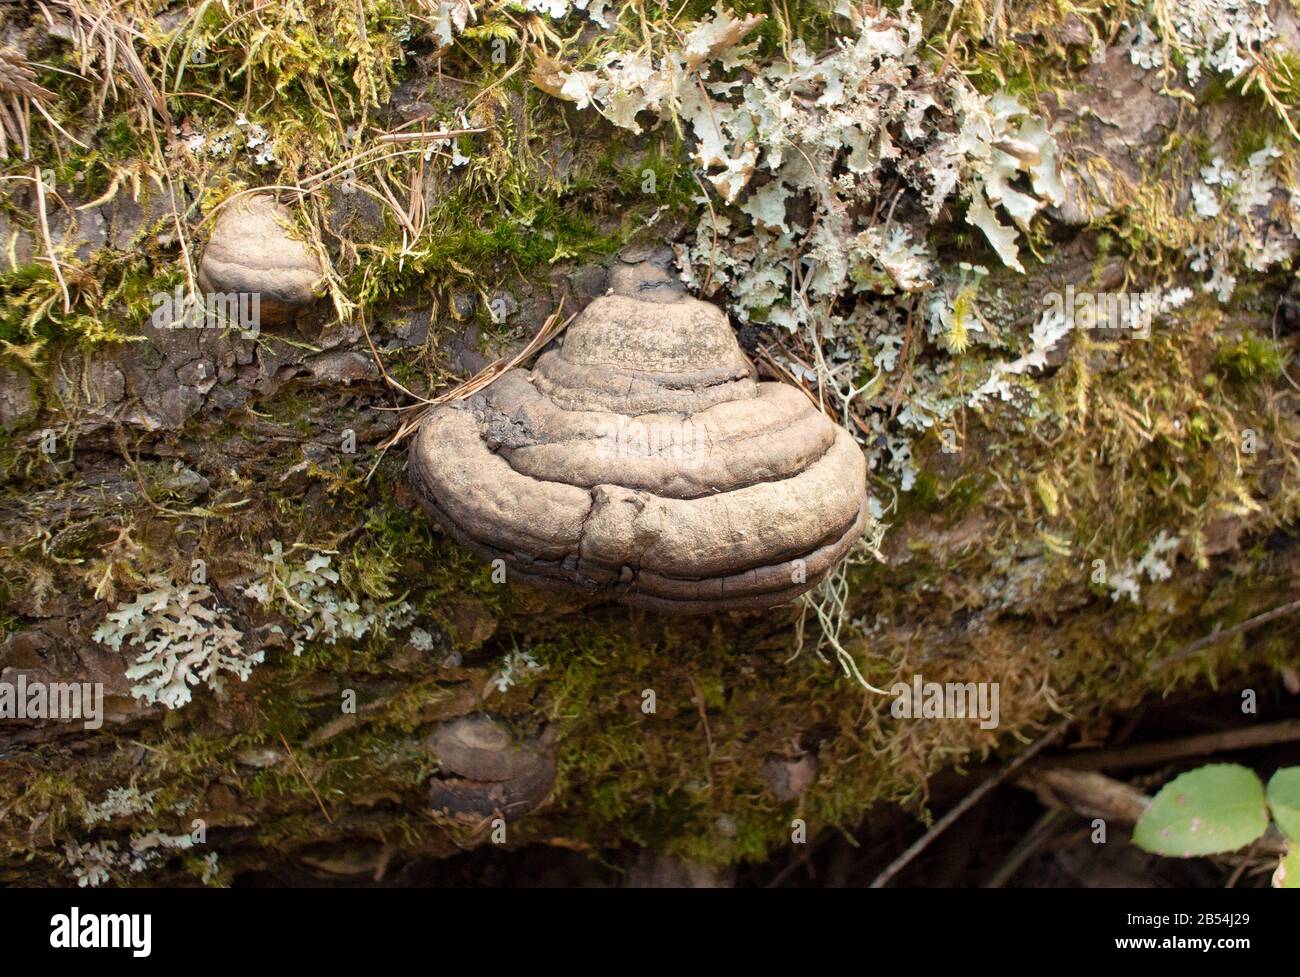 A Tinder Conk mushroom, Fomes fomentarius, growing on a dead, moss covered red birch tree, Betula occidentalis, Troy, Montana Stock Photo